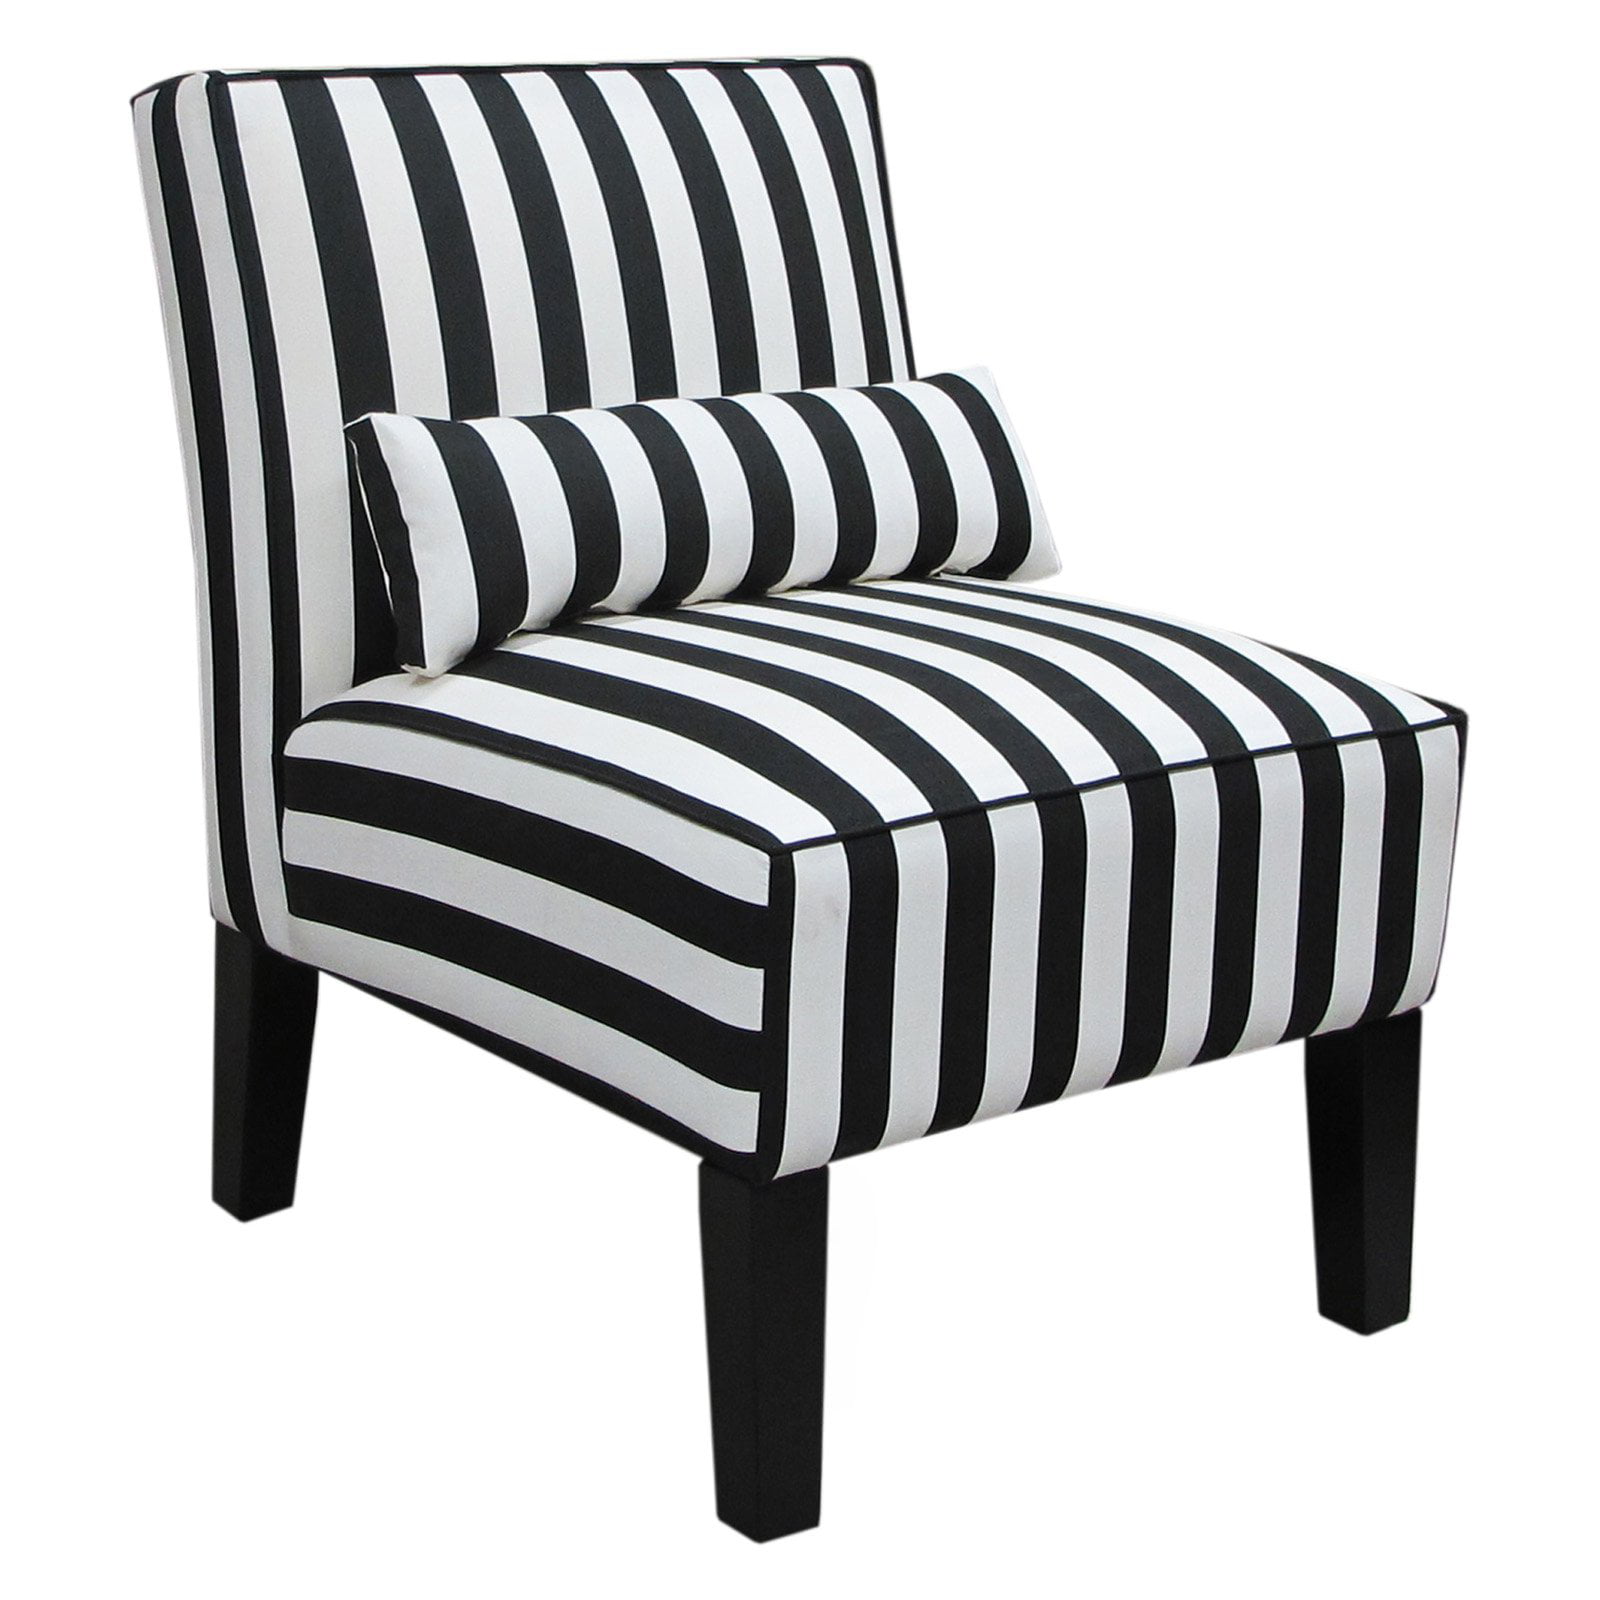 Featured image of post Black And White Striped Living Room Chairs : Try finding the one that is right our selection of brands is always growing, so chances are your favorite is on aliexpress.